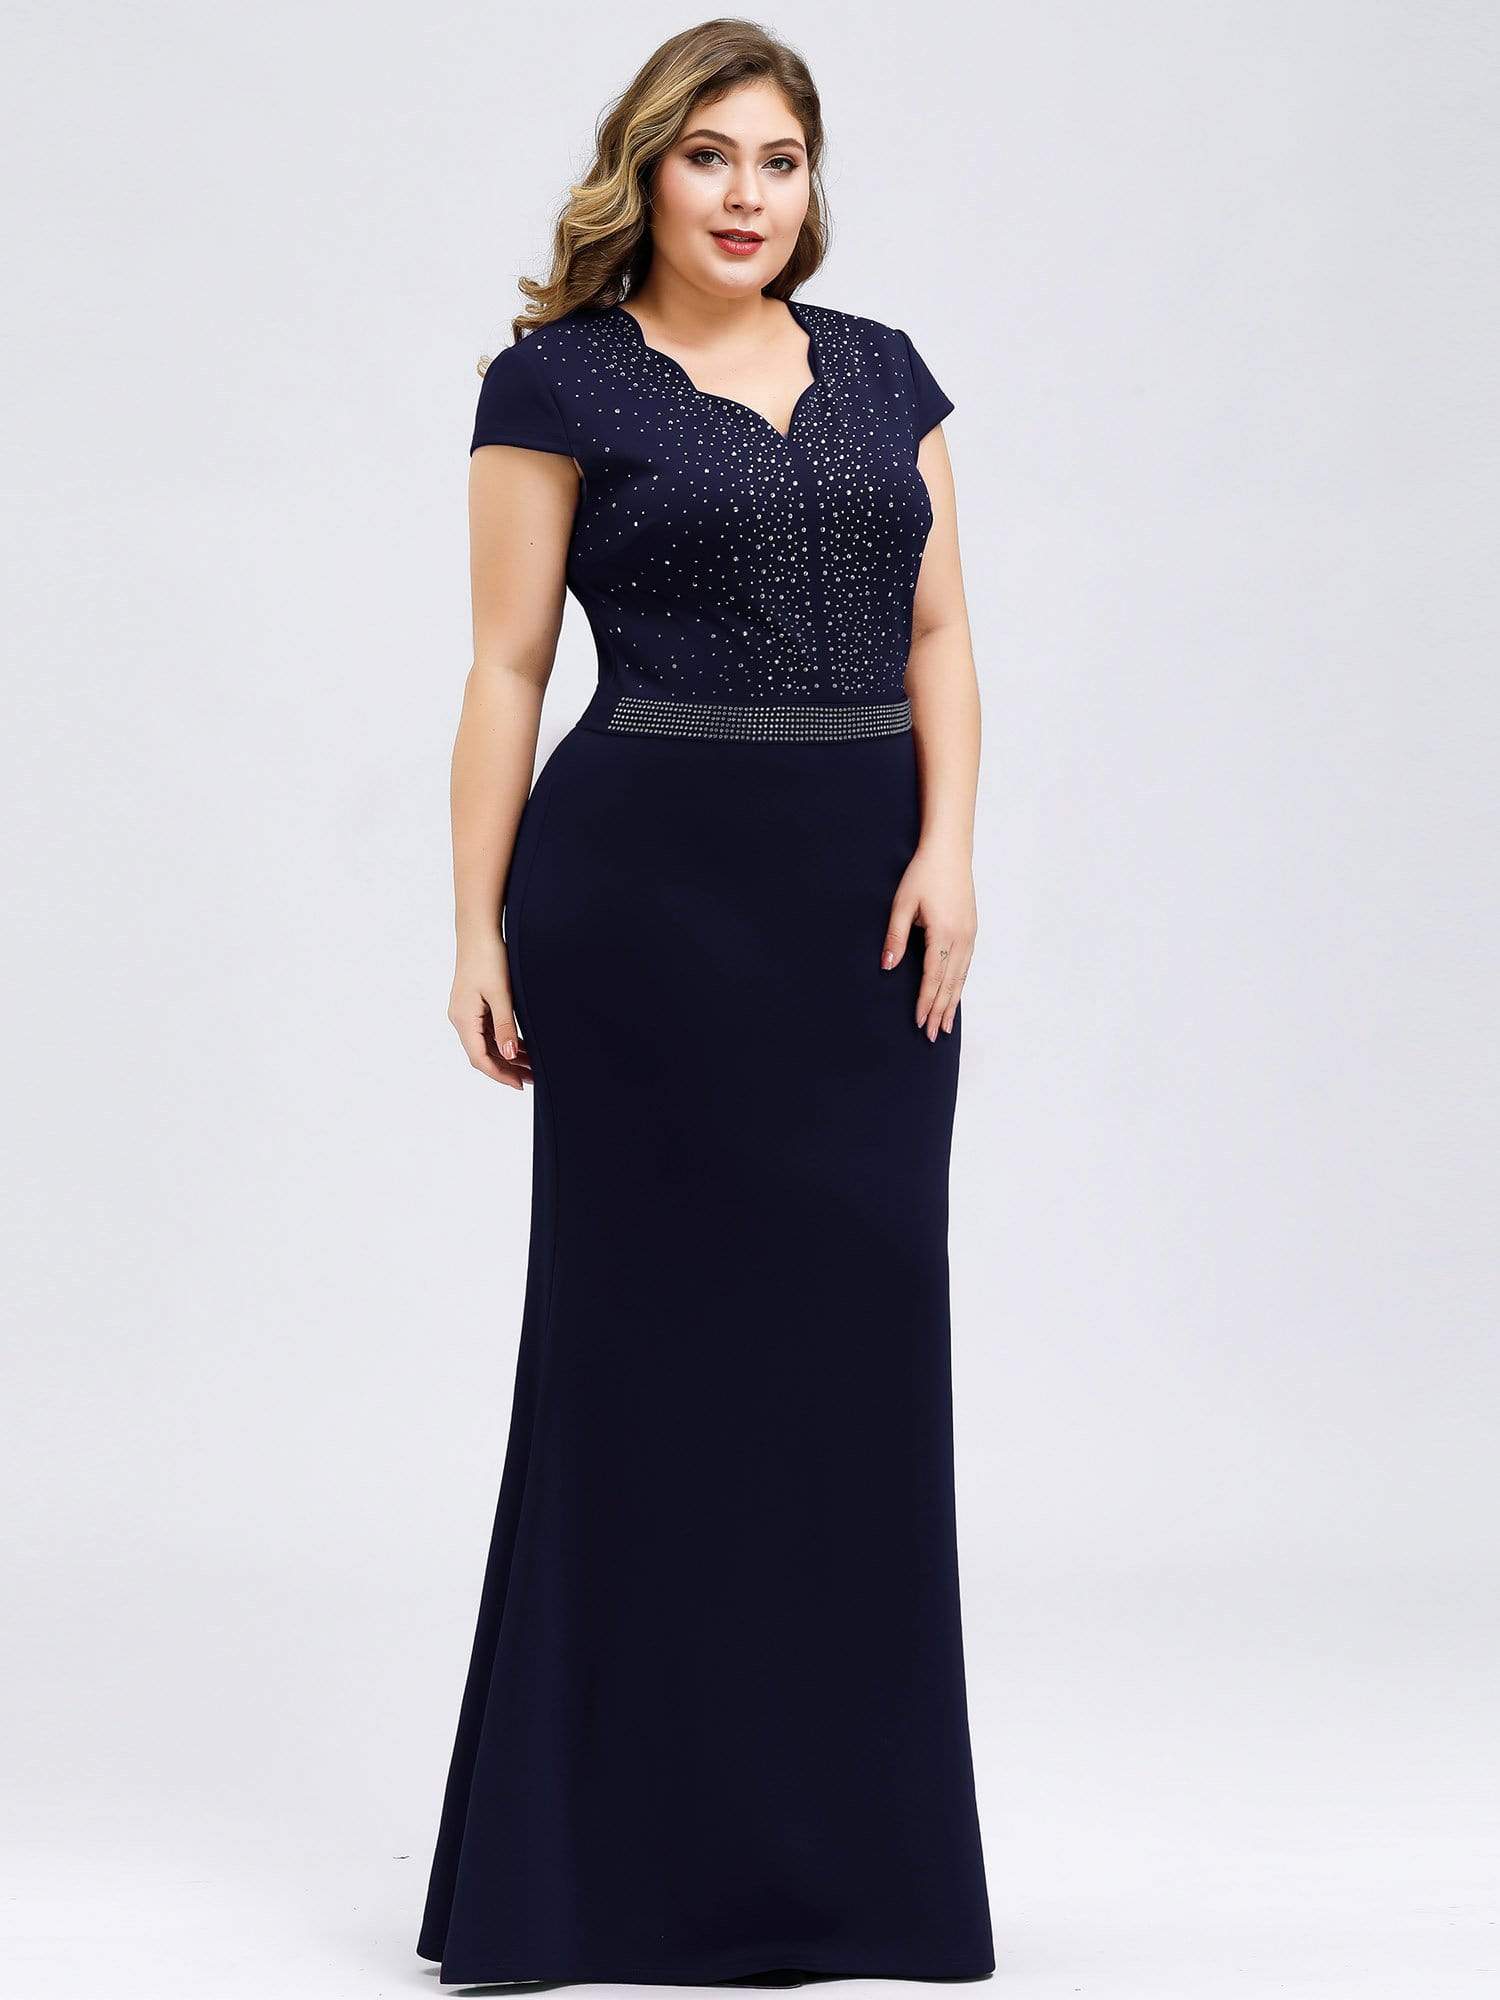 Sparkly Rhinestone Print Plus Size Evening Gowns With Cap Sleeve